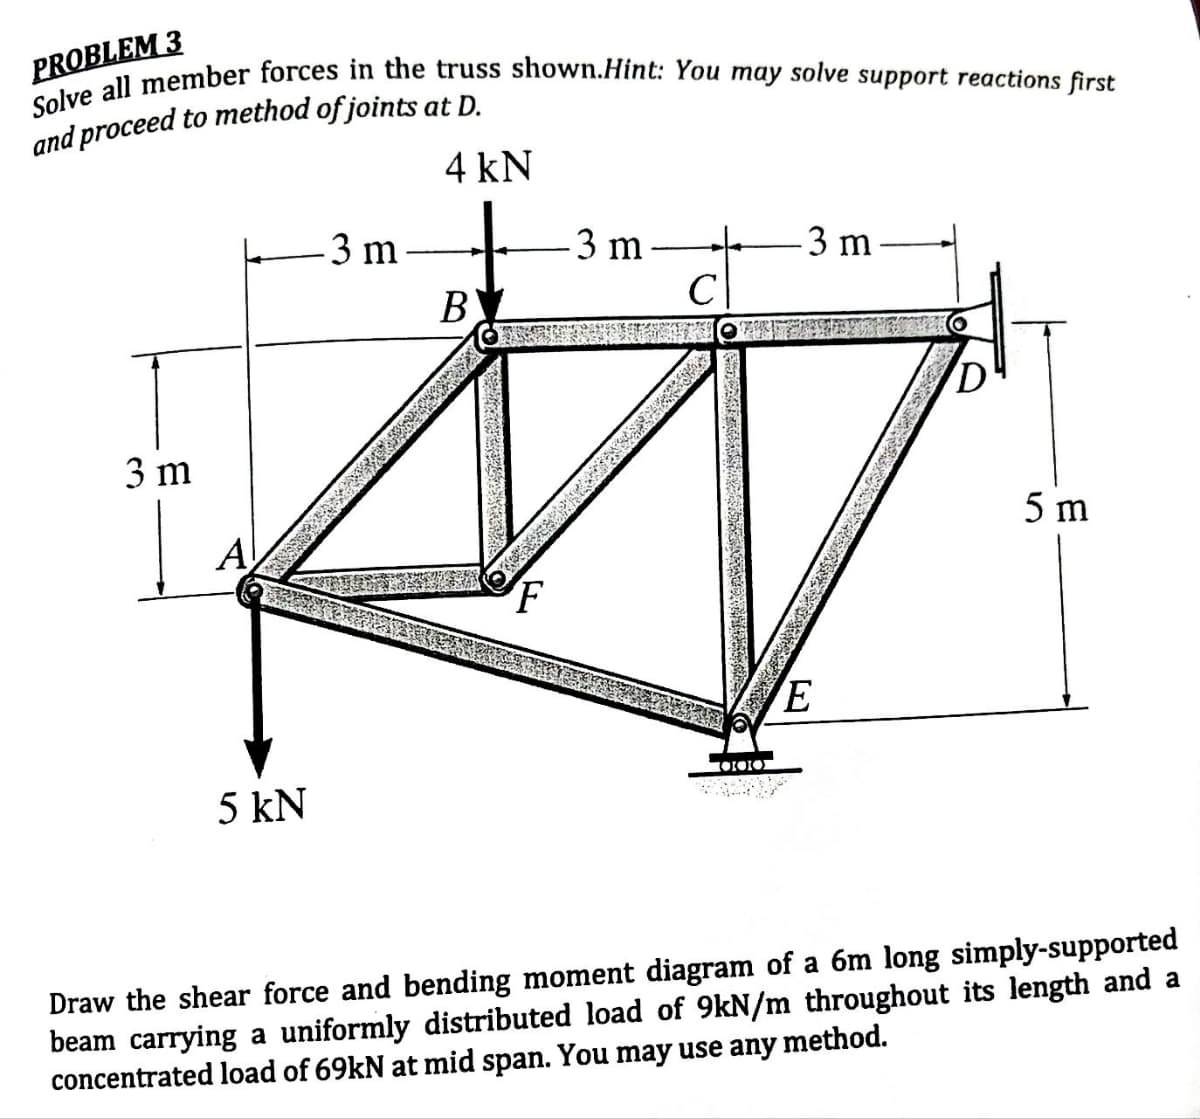 PROBLEM 3
Solve all member forces in the truss shown.Hint: You may solve support reactions first
and proceed to method of joints at D.
4 kN
3 m
5 kN
3 m
BL
-3 m
с
CERE
OOK
3 m.
E
D
5 m
Draw the shear force and bending moment diagram of a 6m long simply-supported
beam carrying a uniformly distributed load of 9kN/m throughout its length and a
concentrated load of 69kN at mid span. You may use any method.